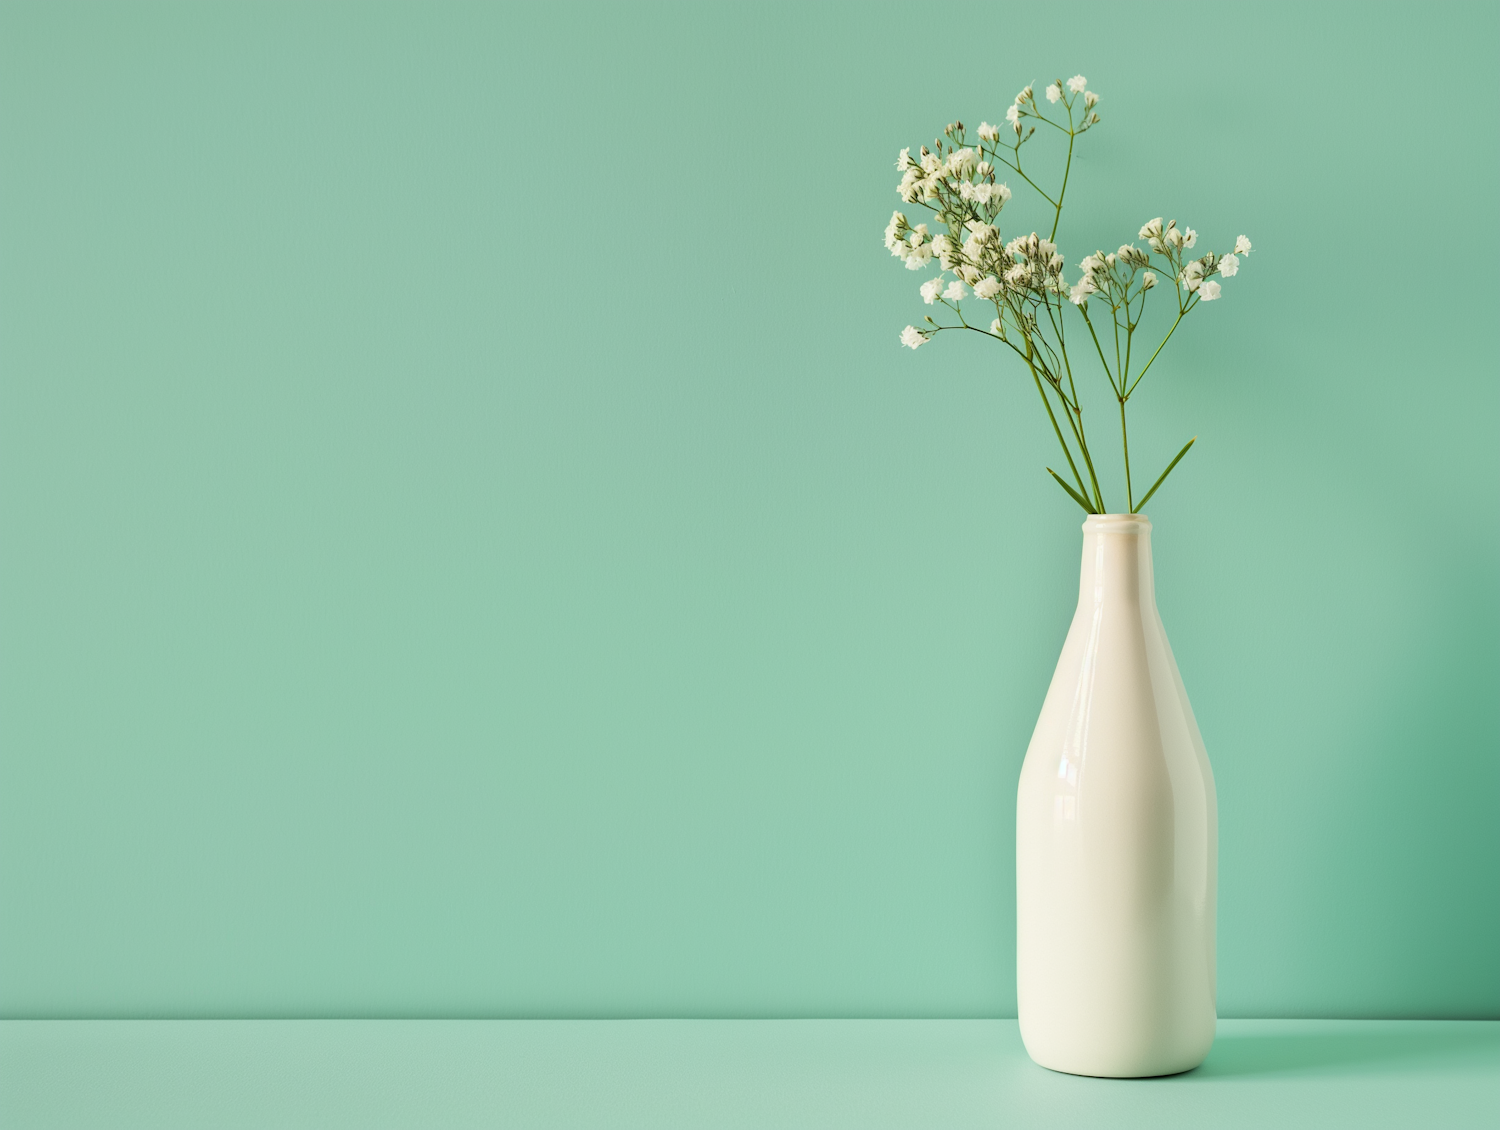 Minimalist White Vase with Delicate Flowers